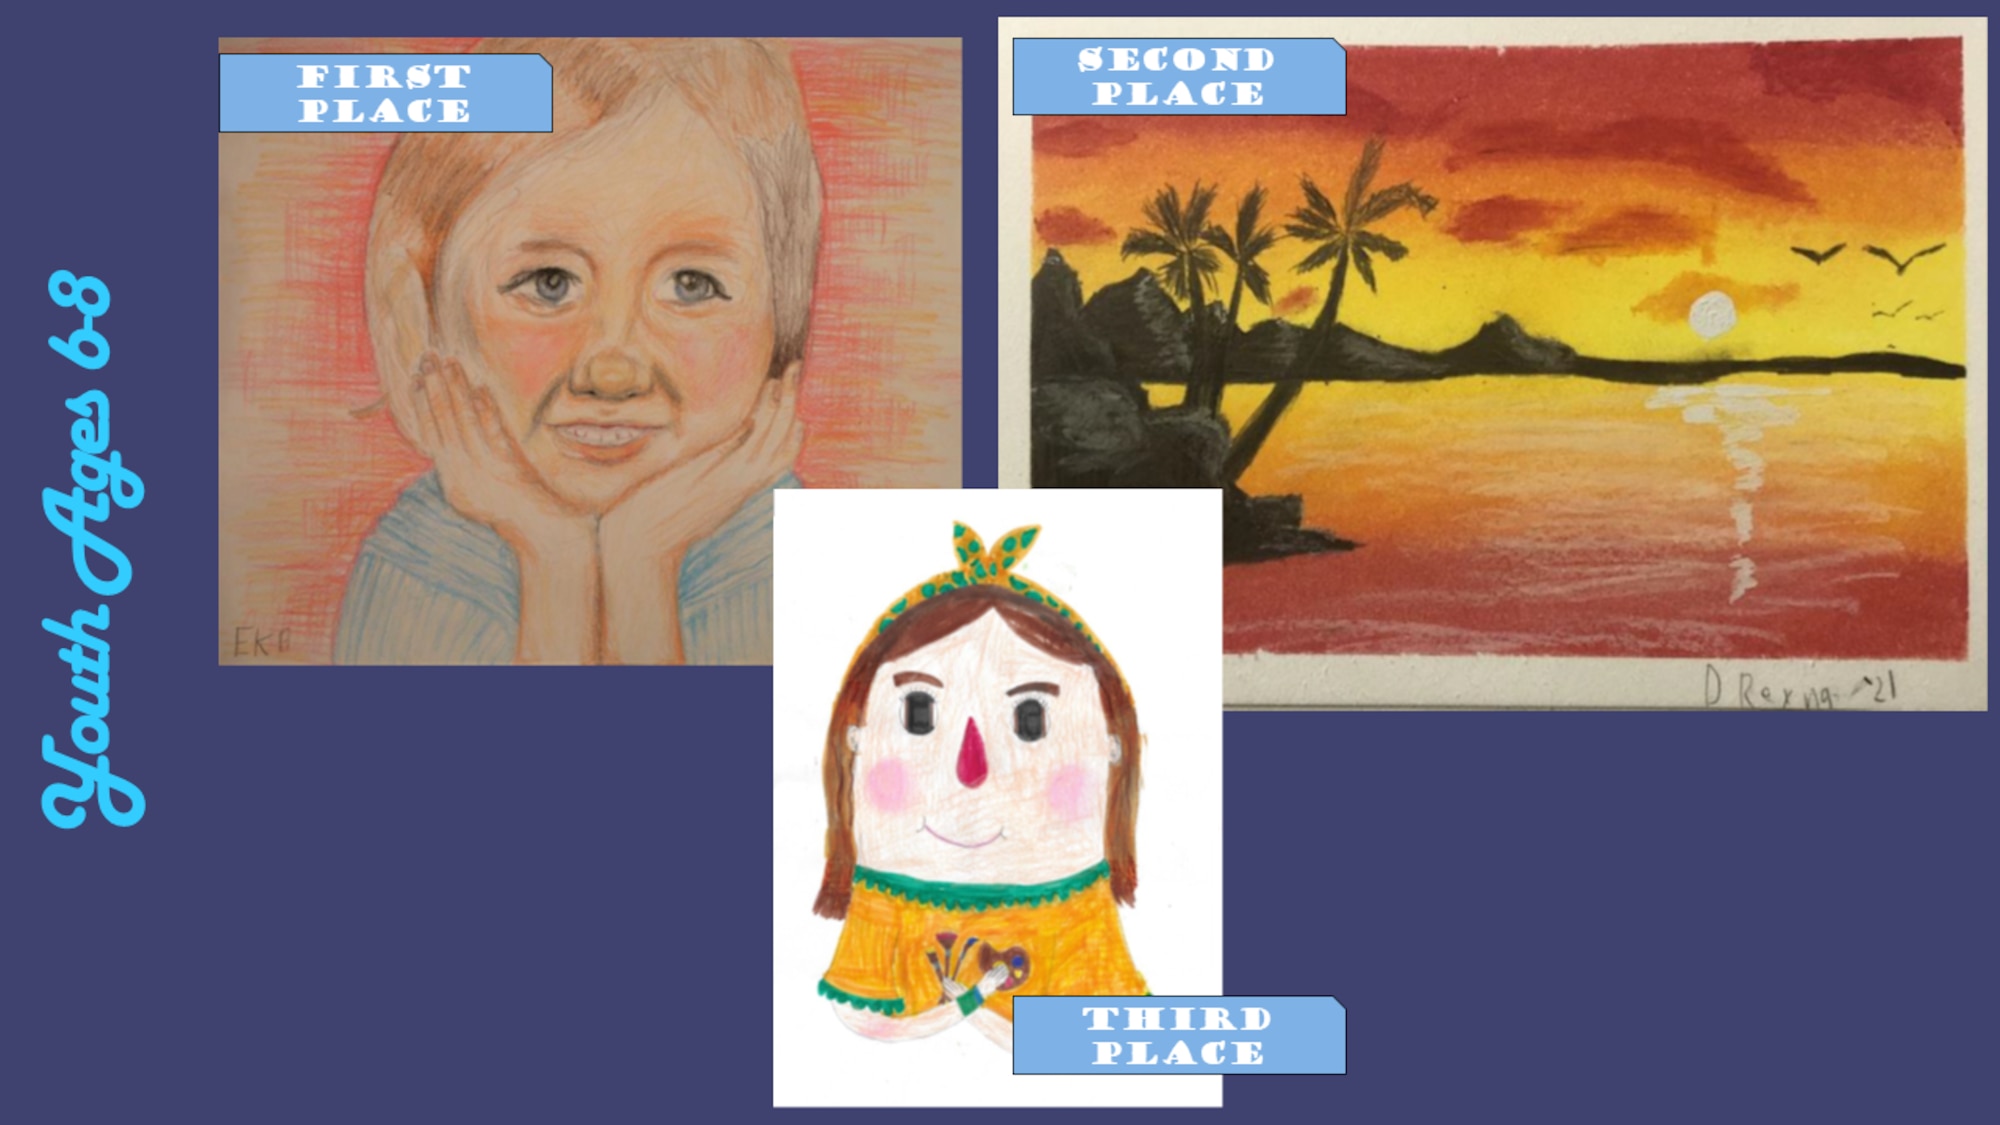 The Air Force Services Center recently announced the winners of the annual Air Force Art Contest.